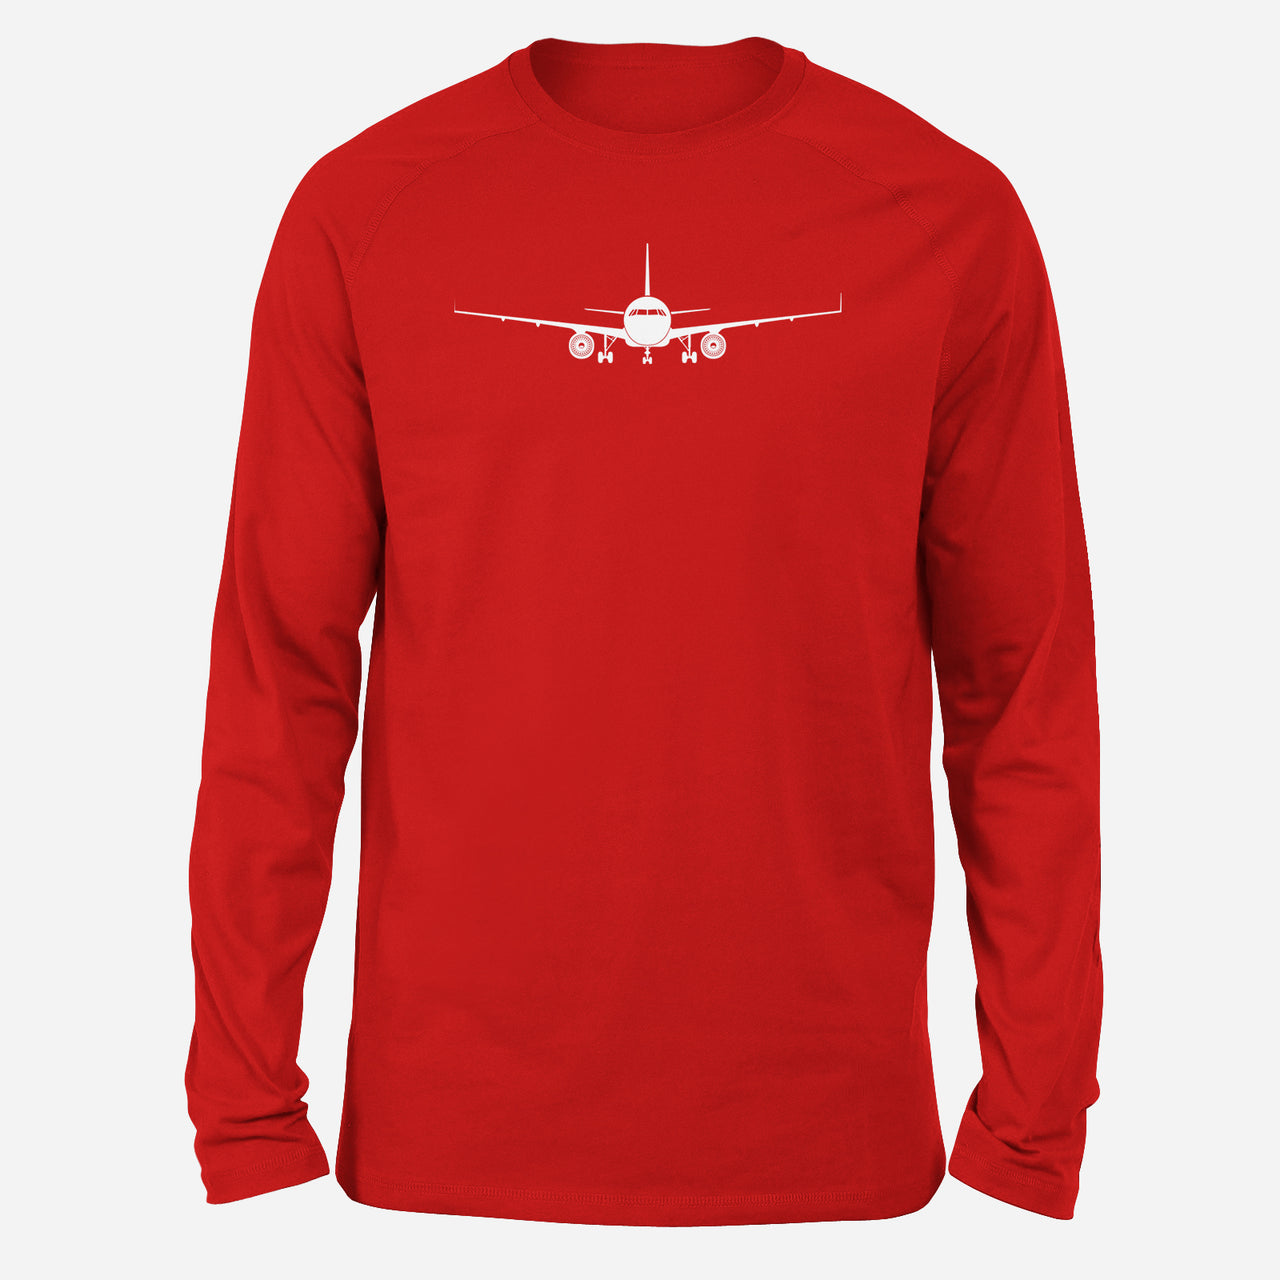 Airbus A320 Silhouette Designed Long-Sleeve T-Shirts